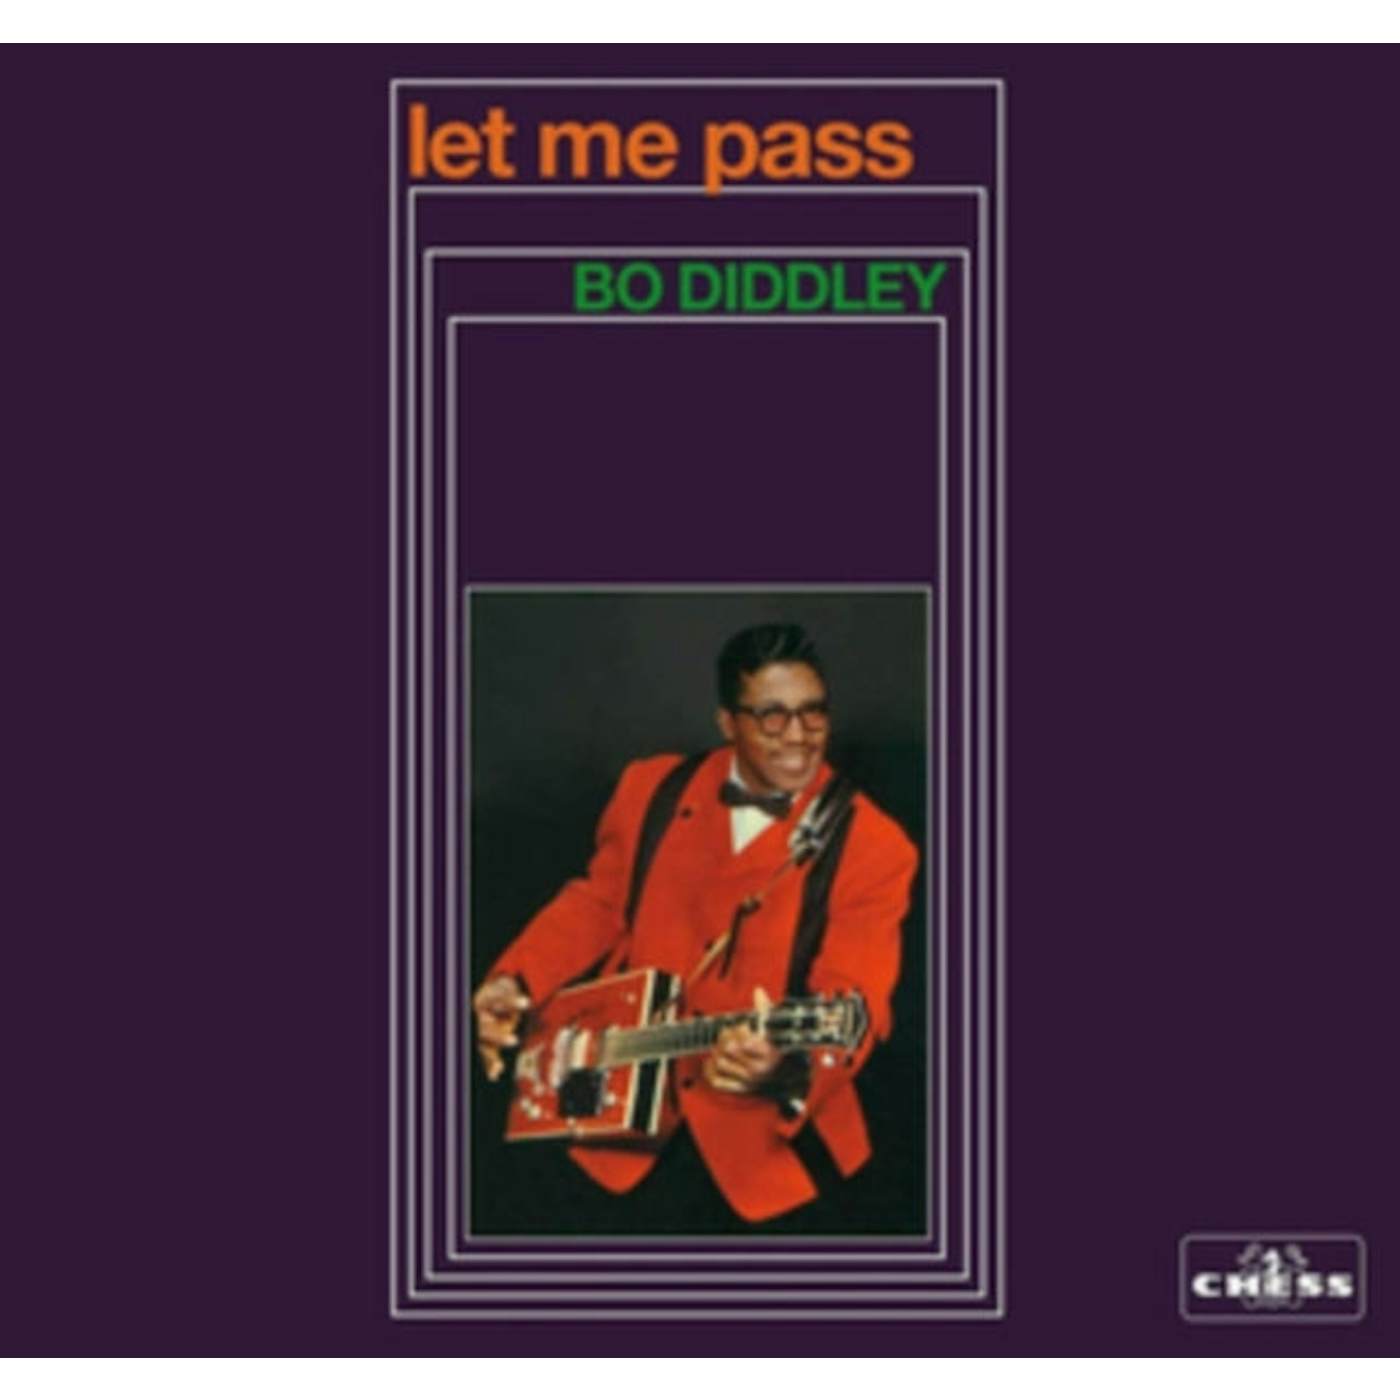 Bo Diddley CD - Let Me Pass